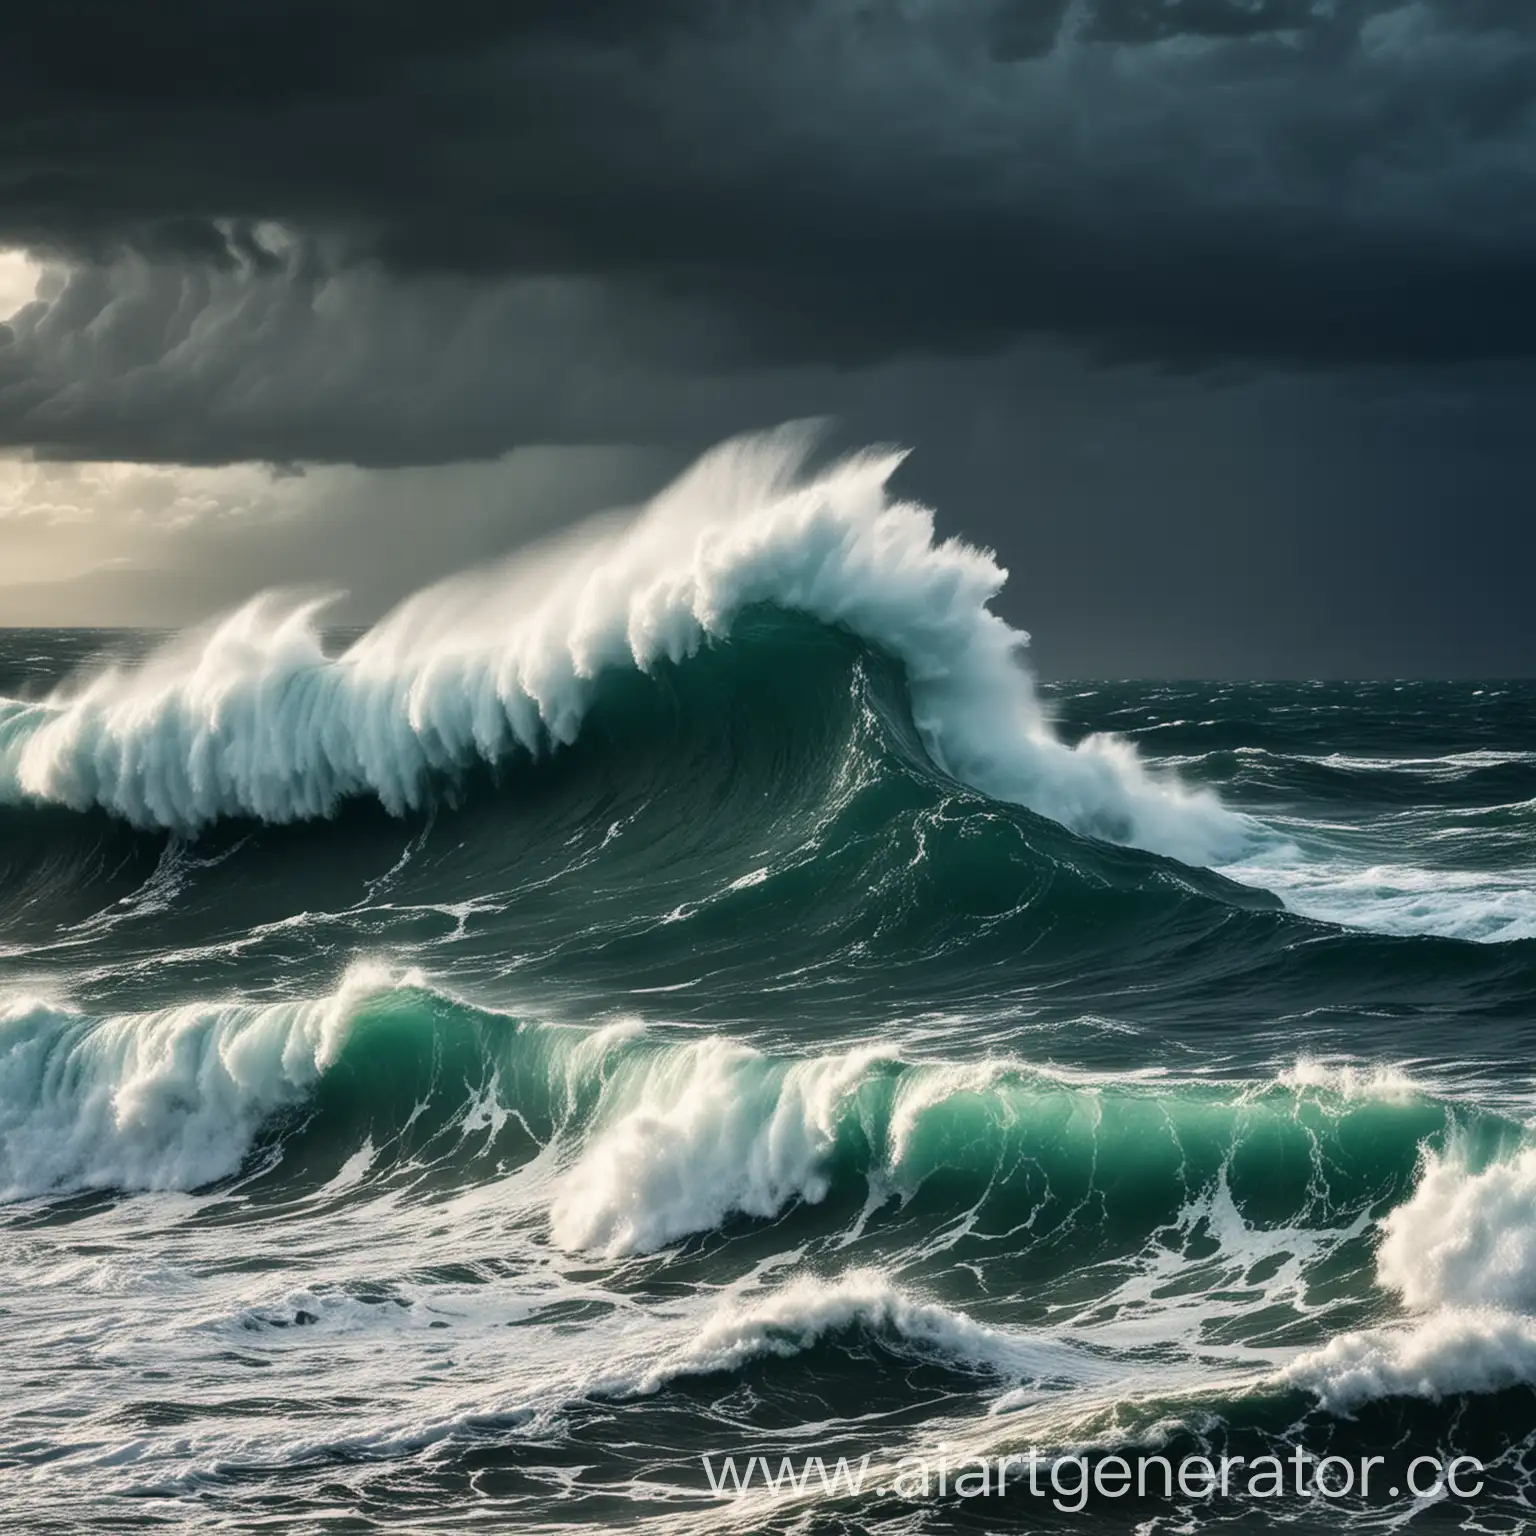 Majestic-Ocean-Storm-Dramatic-Seascape-with-Rolling-Waves